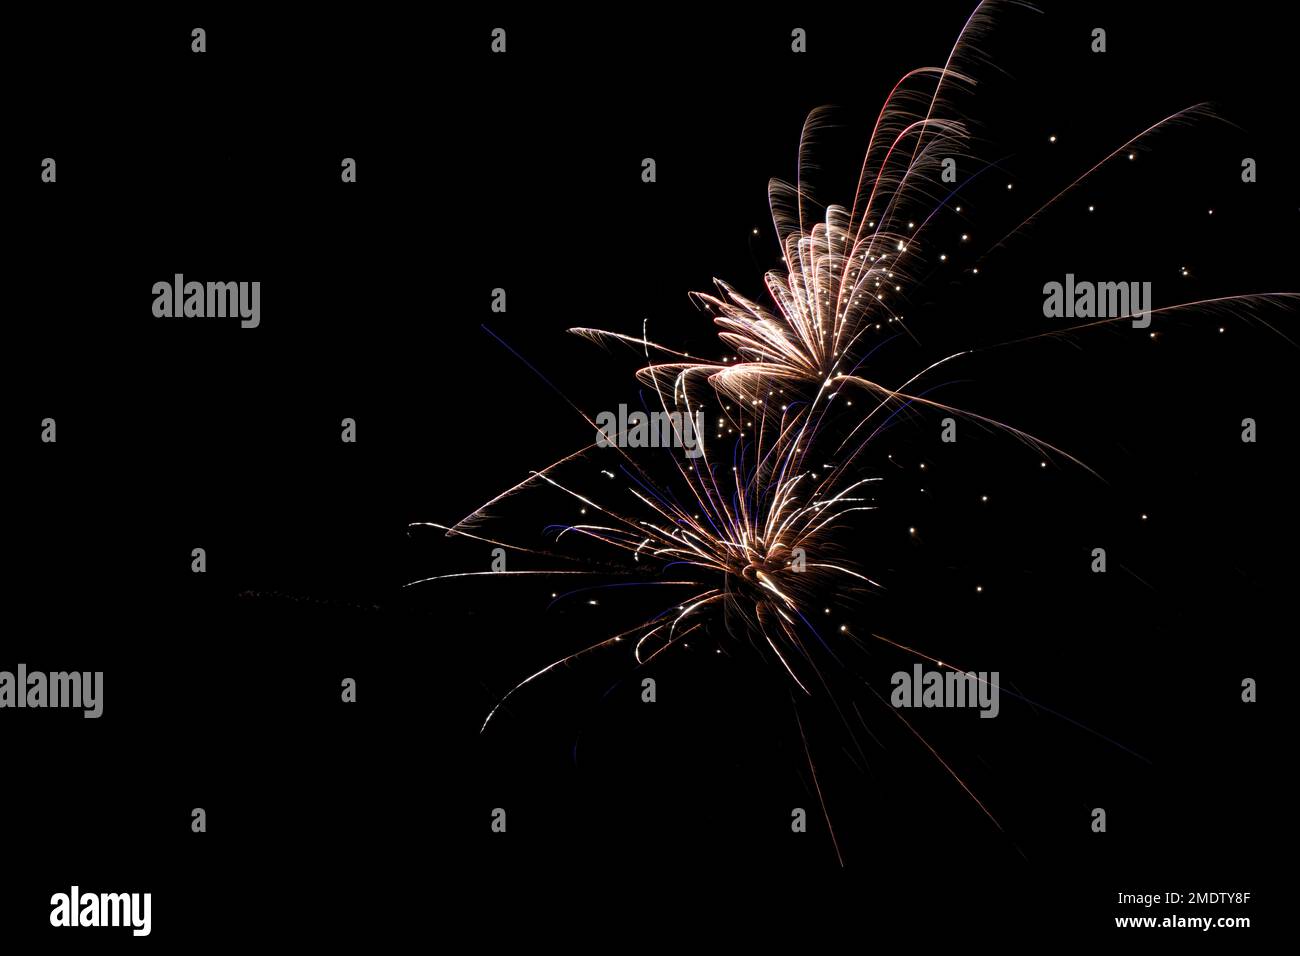 Real fireworks photography and abstract colorful fireworks background Stock Photo